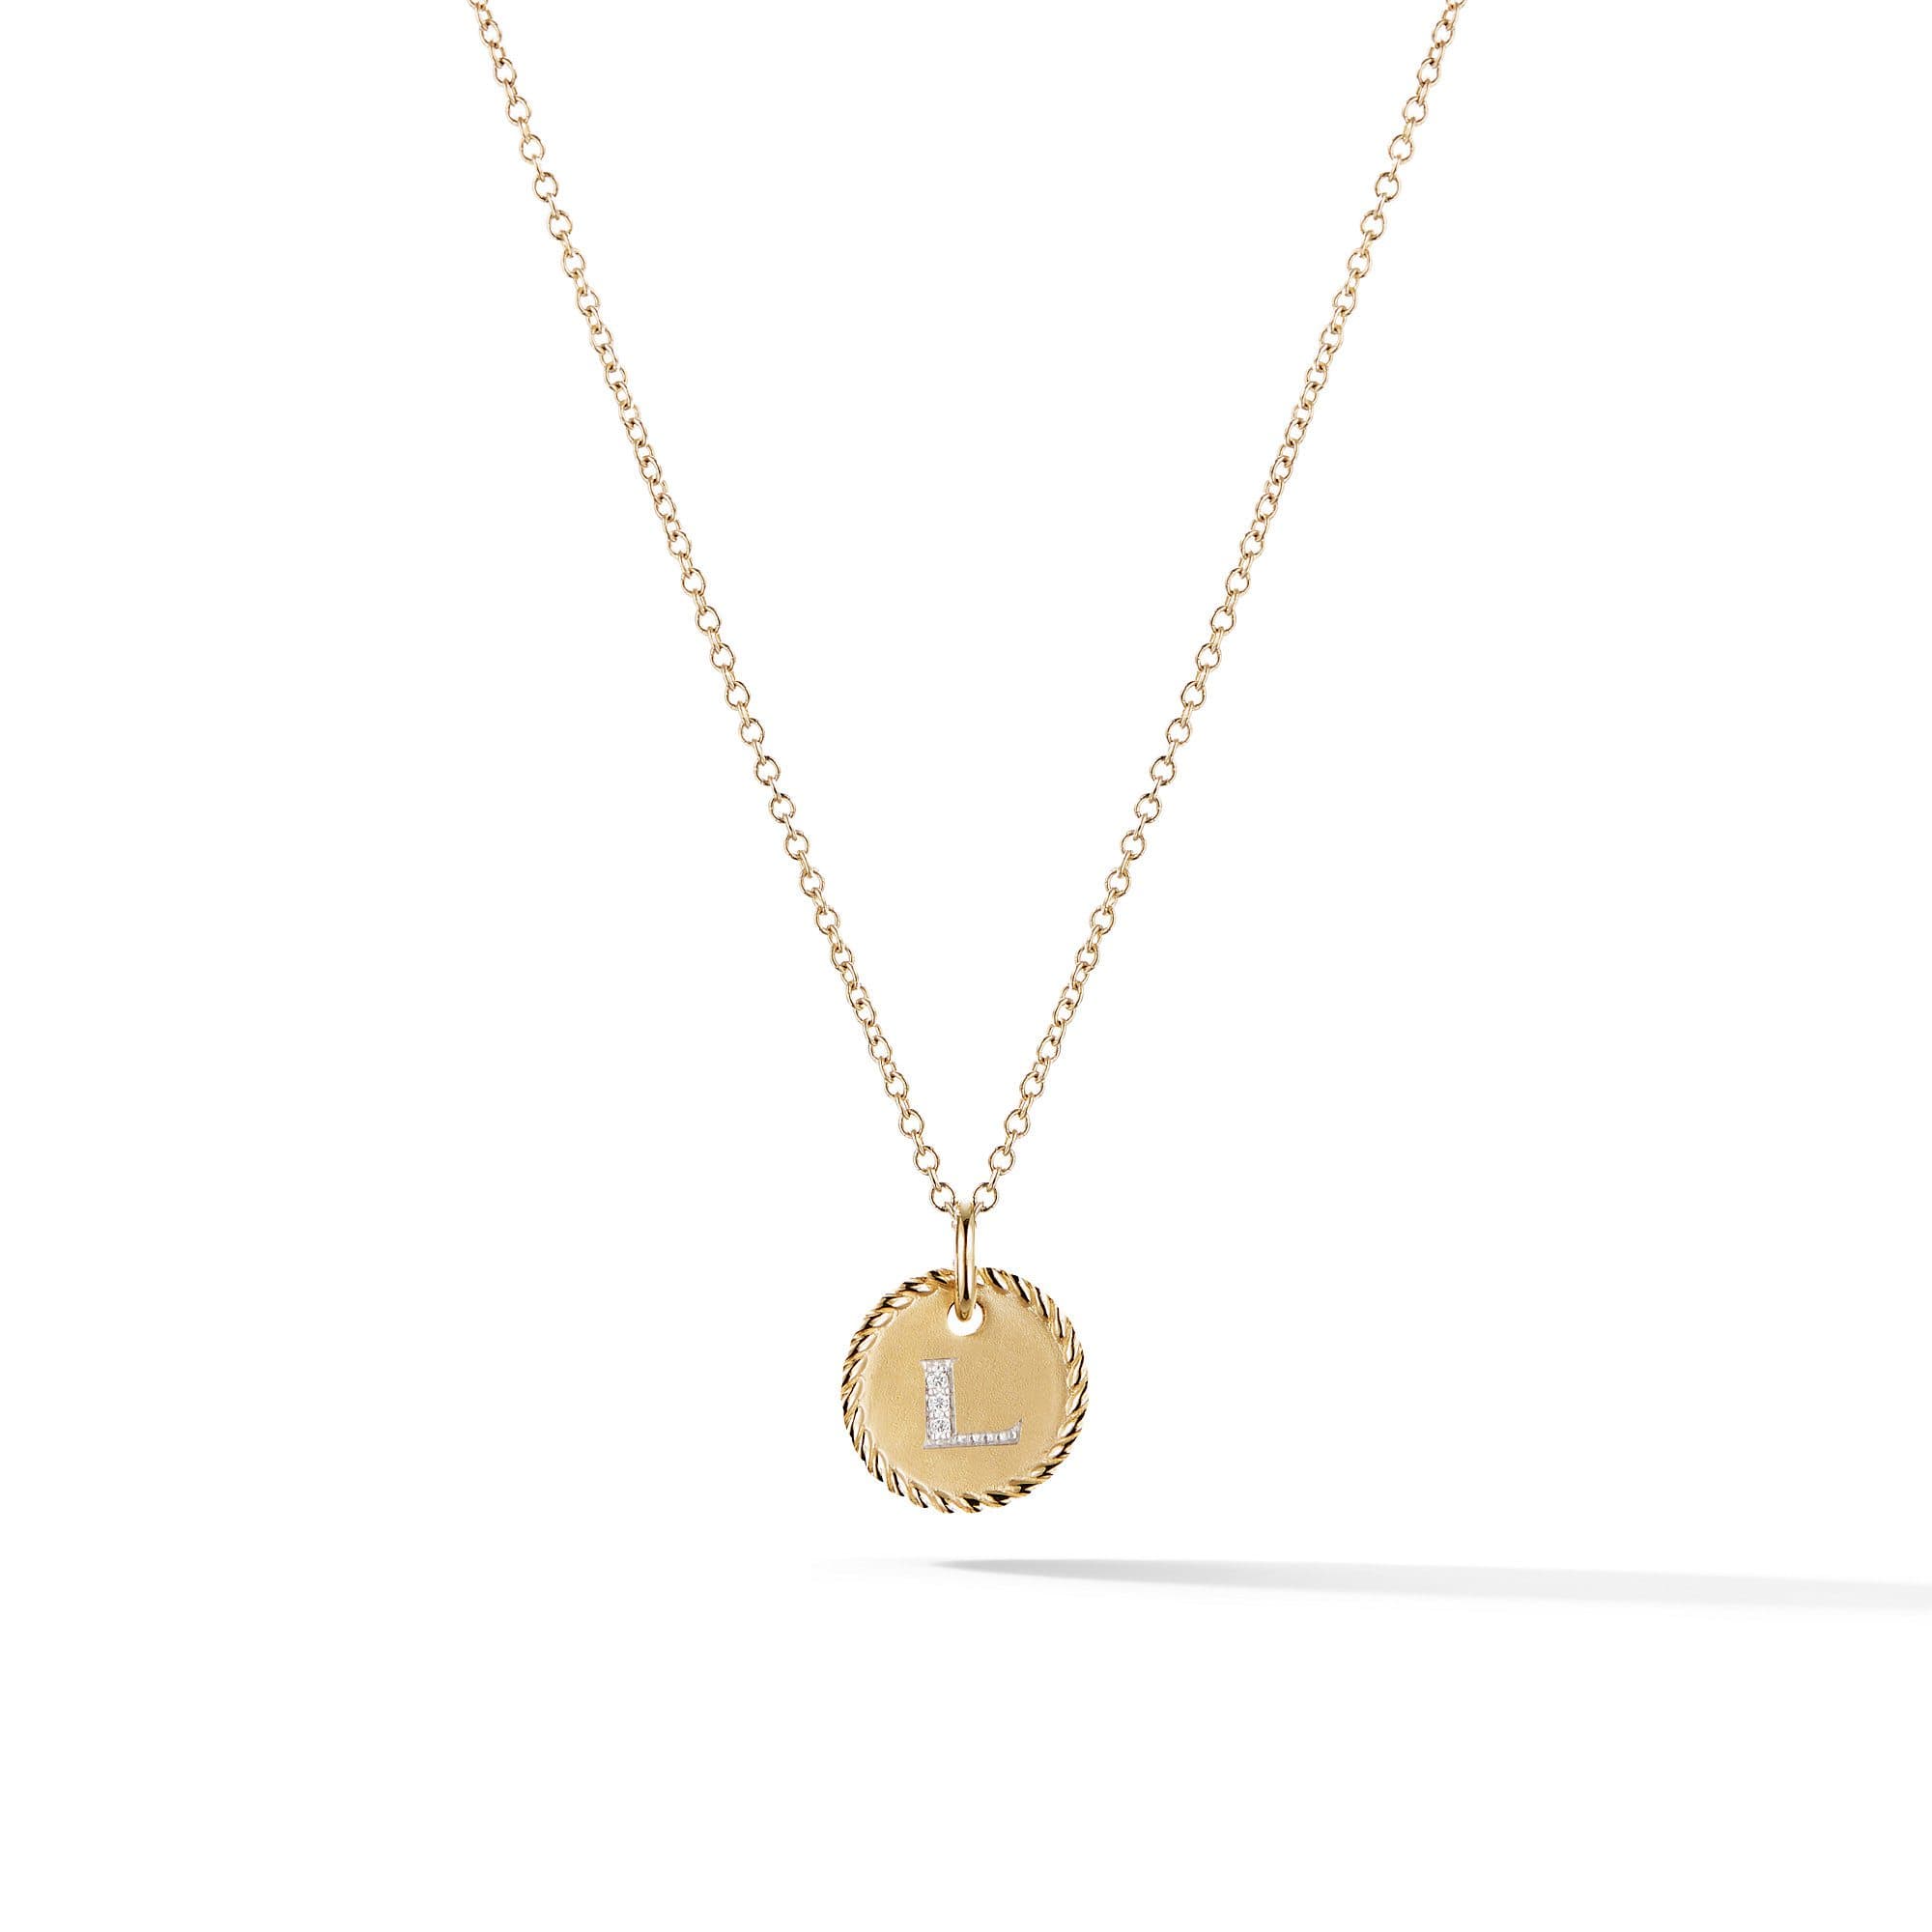 David Yurman L Initial Charm Necklace in 18k Yellow Gold with Diamonds